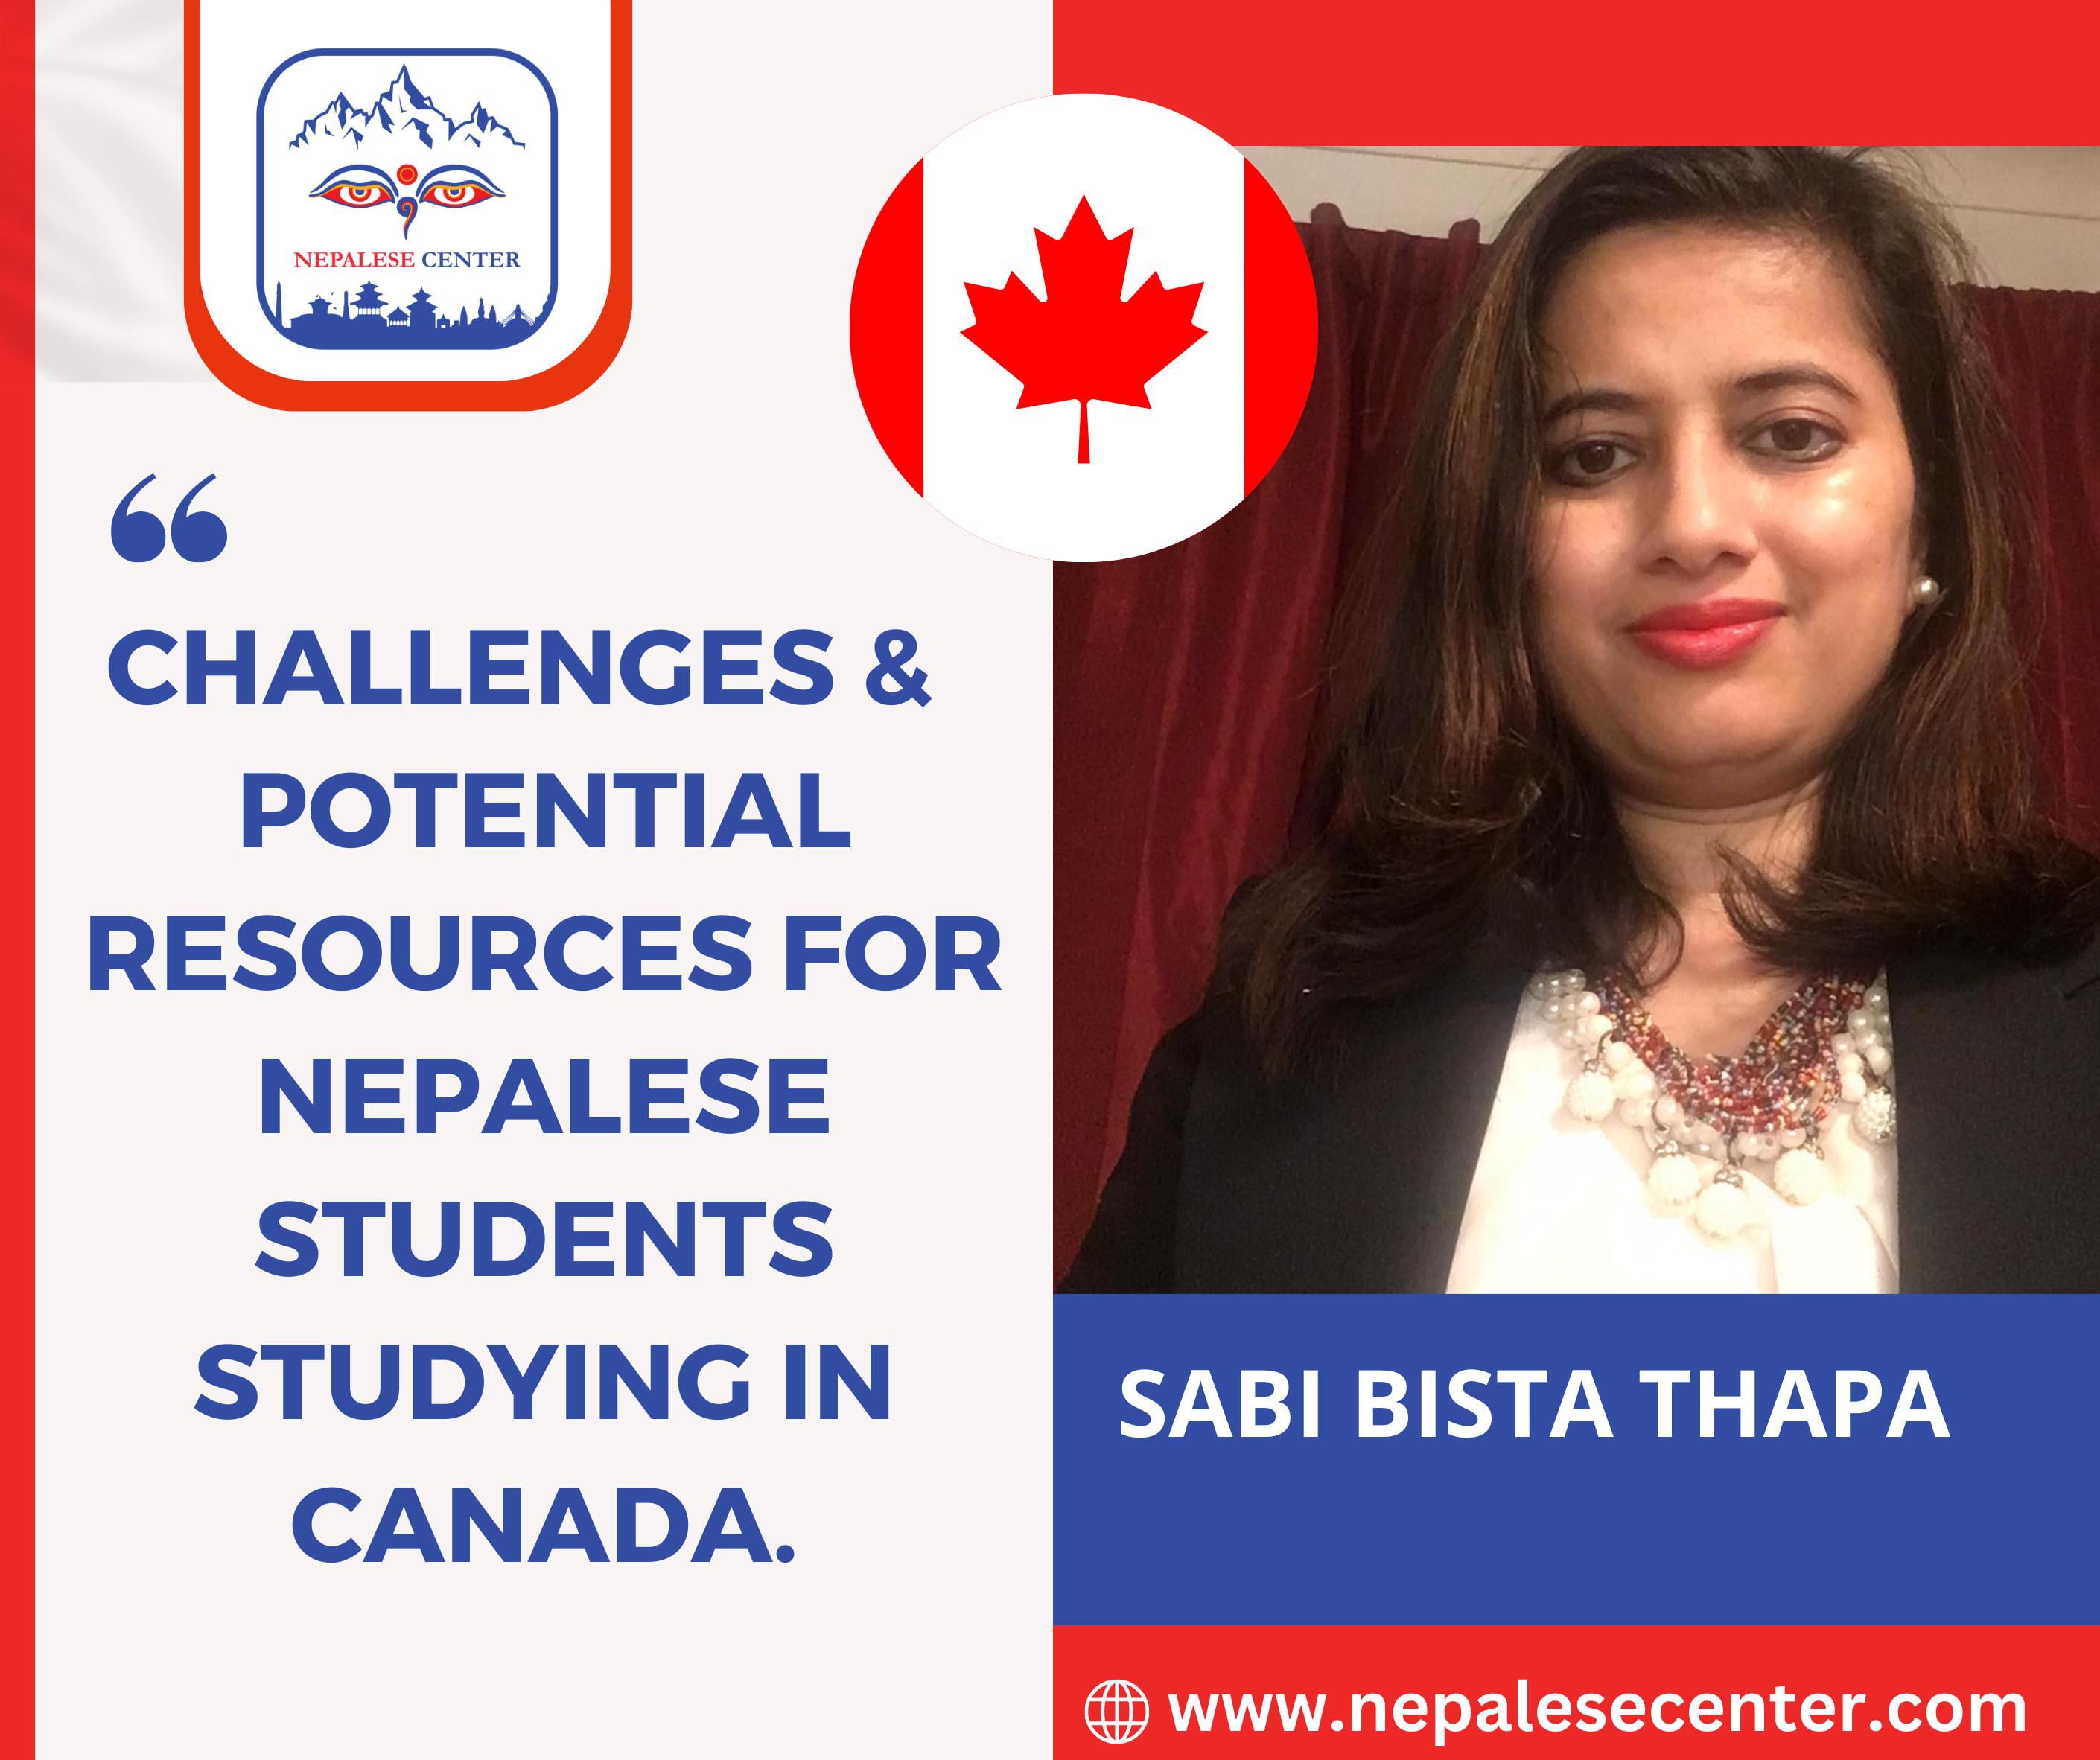 The challenges and potential resources for Nepalese students studying in Canada.